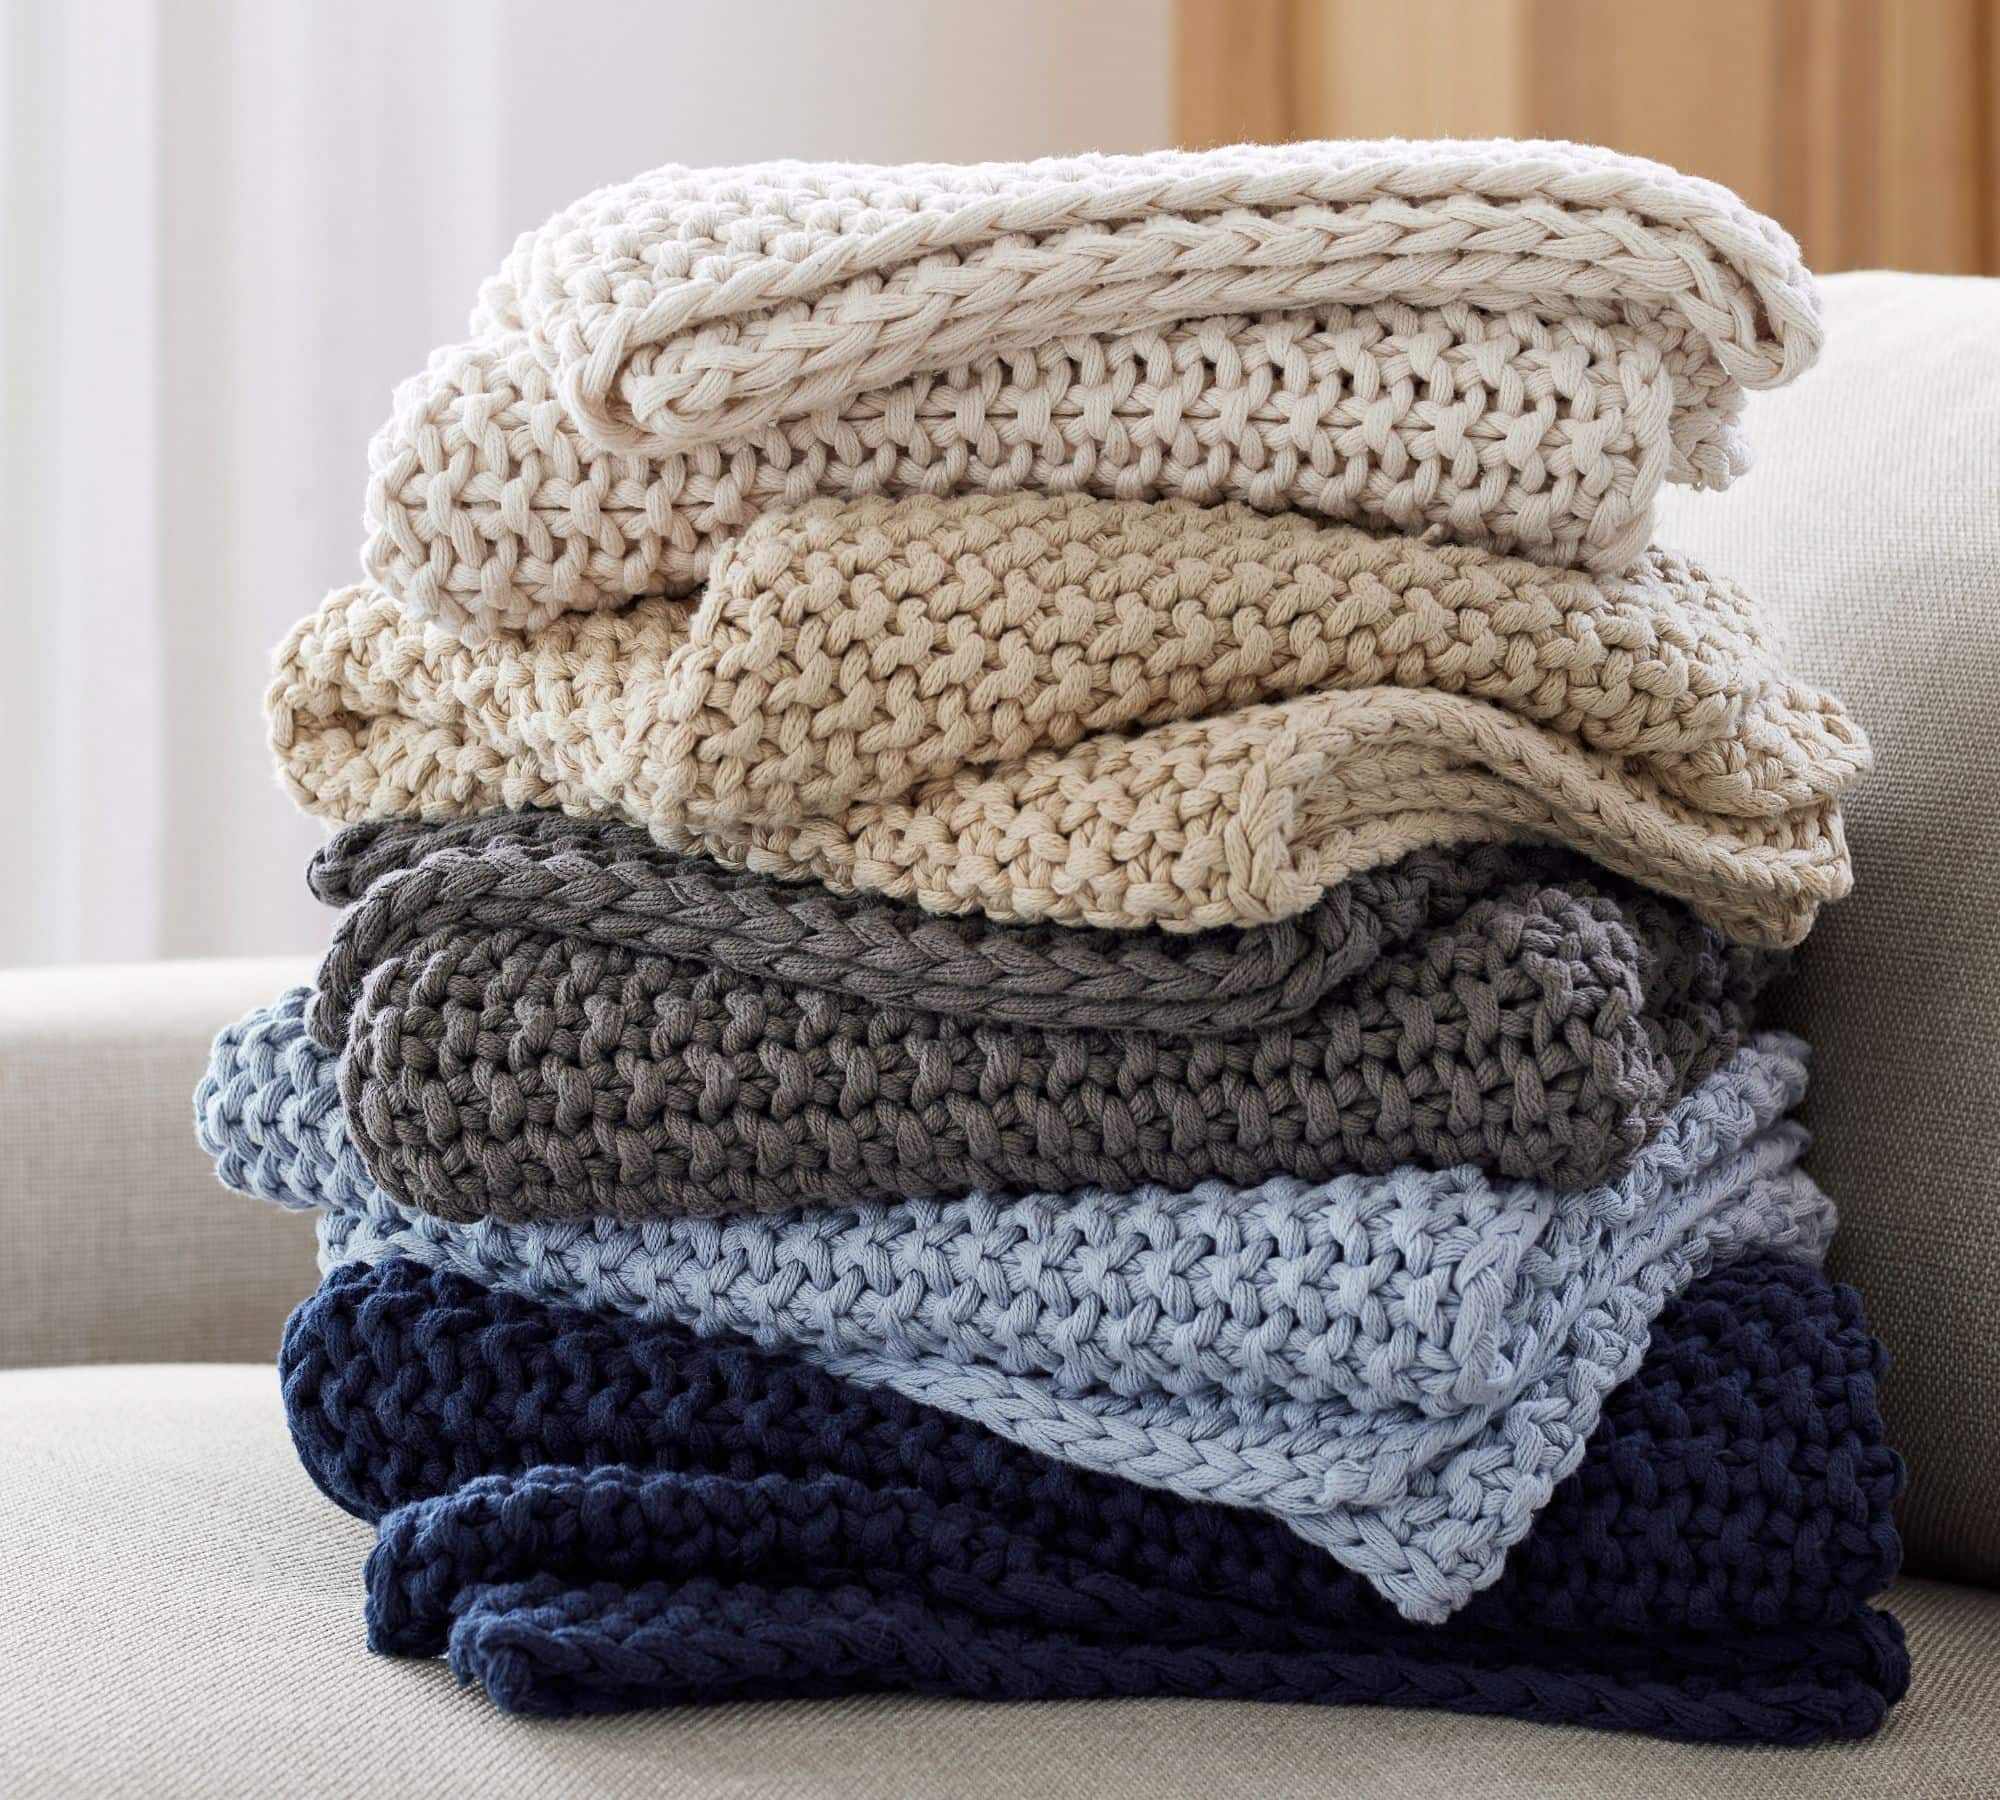 stack of chunky knit blankets in navy, blue, dark grey, and cream.